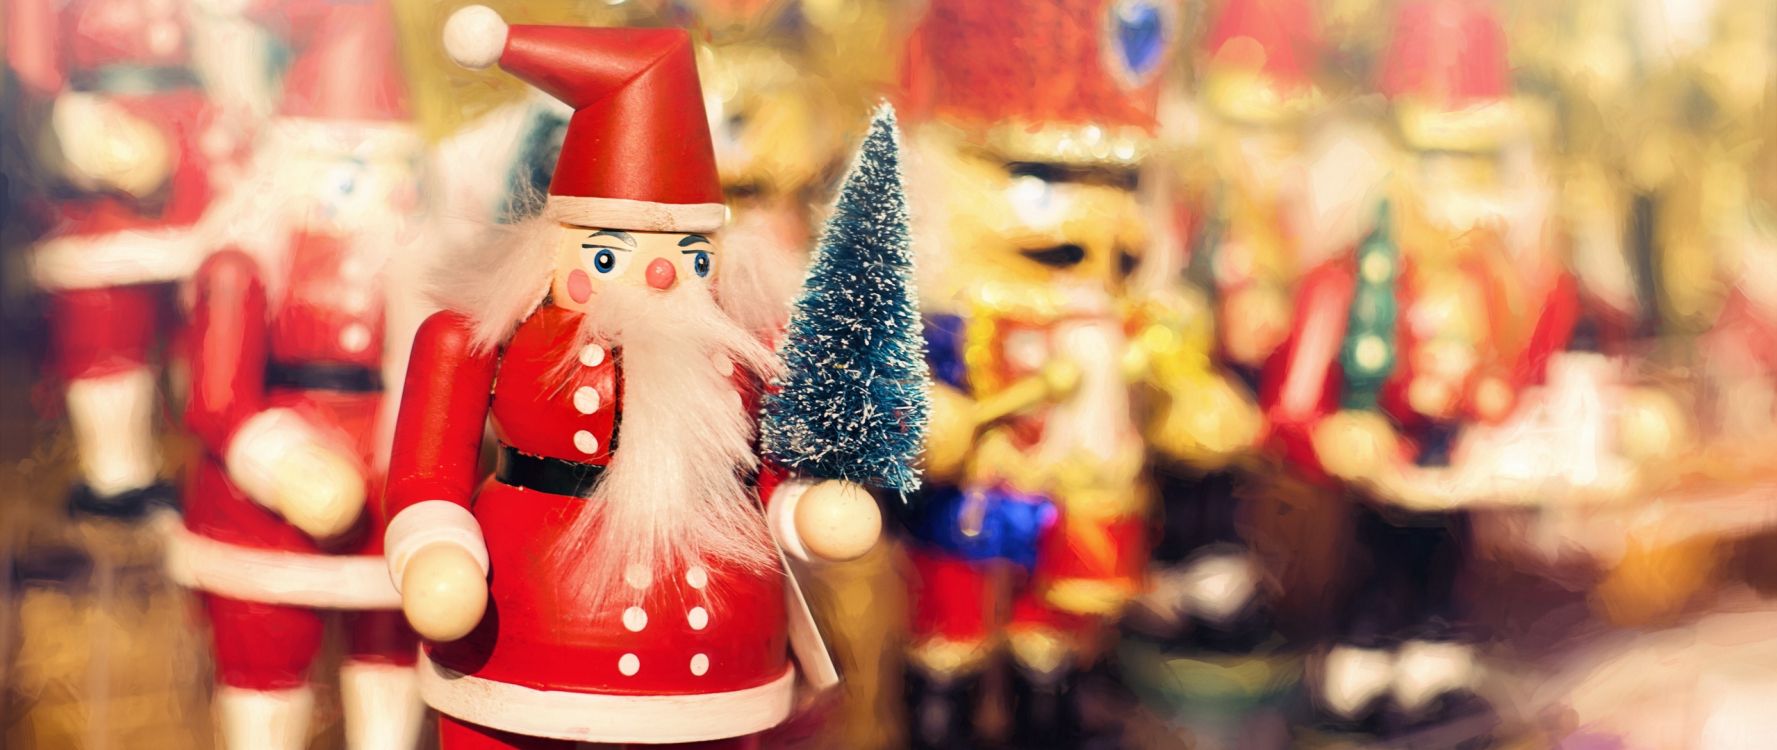 Christmas, Christmas Day, Santa Claus, Christmas Decoration, Holiday. Wallpaper in 2560x1080 Resolution